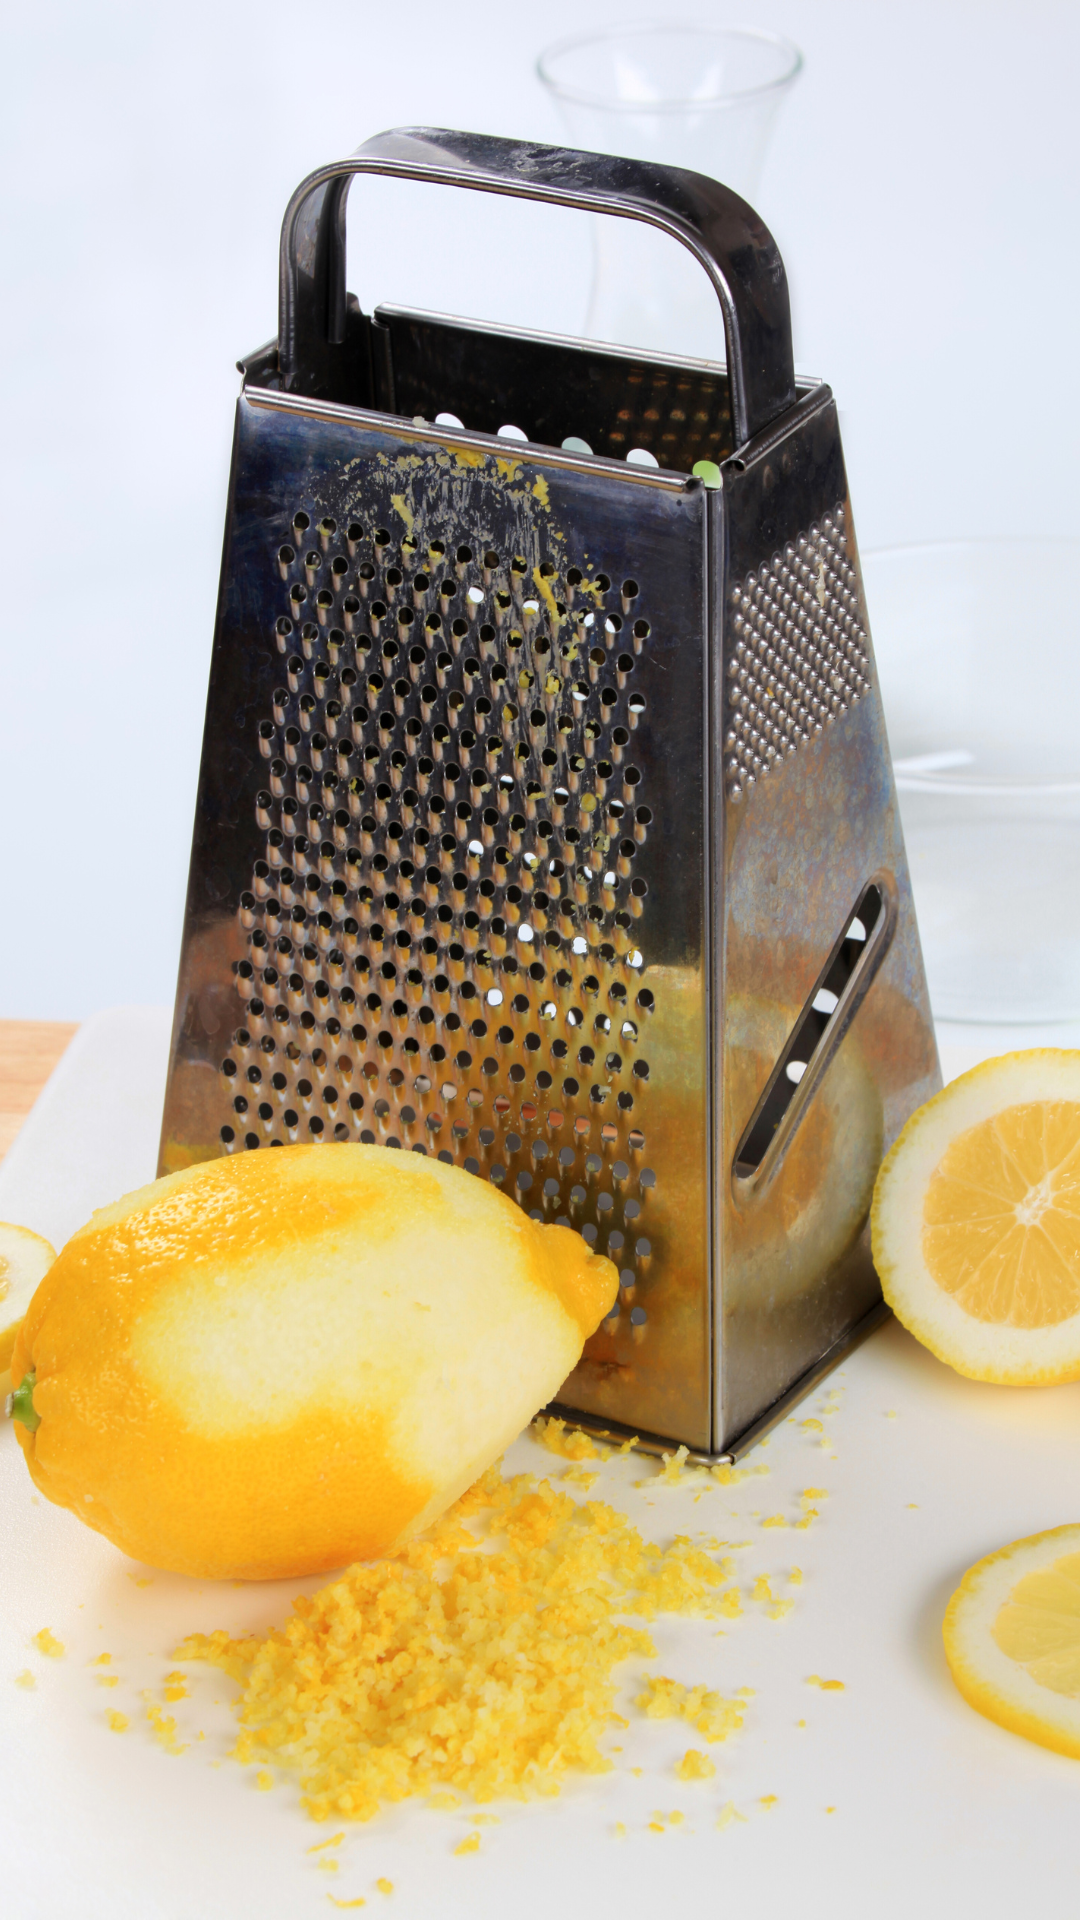 box grater and a lemon being zested